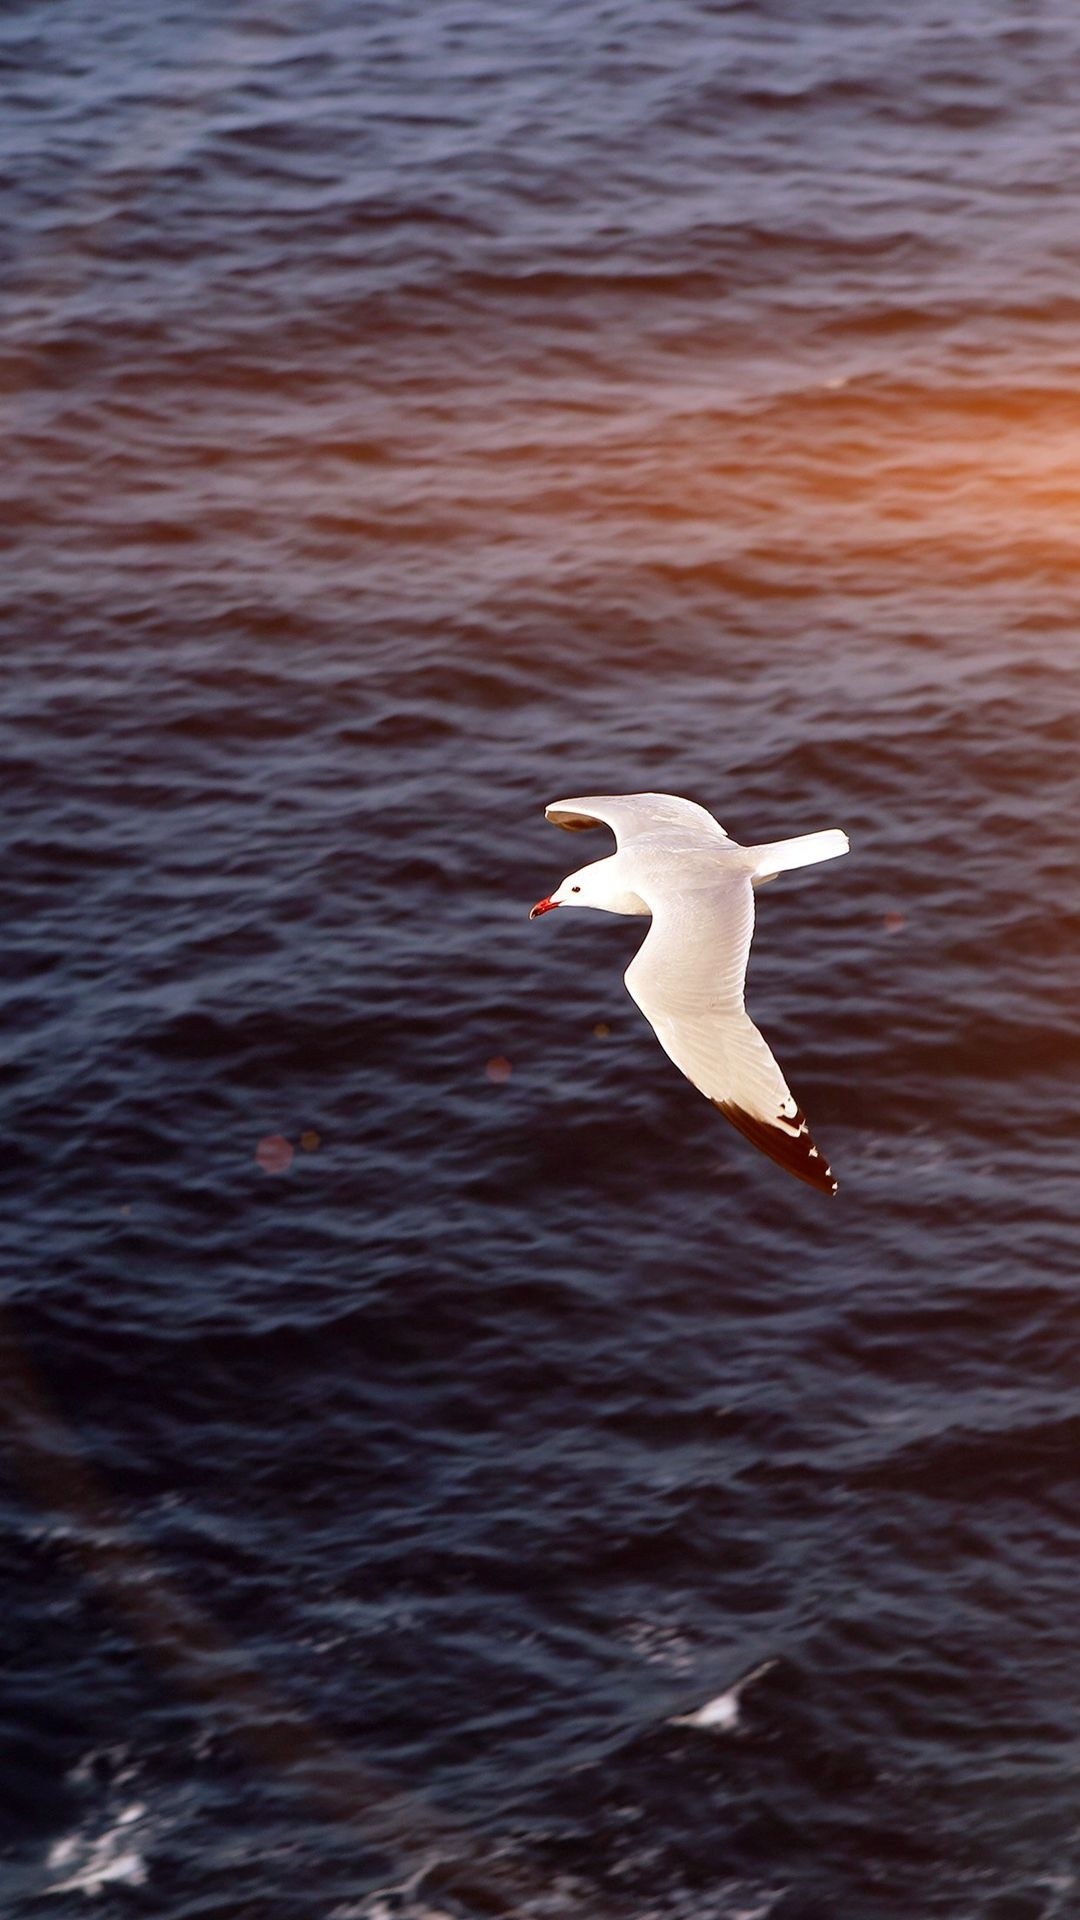 Seagull by the sea, Wallpaper download, Oceanic bliss, Nature's allure, 1080x1920 Full HD Phone